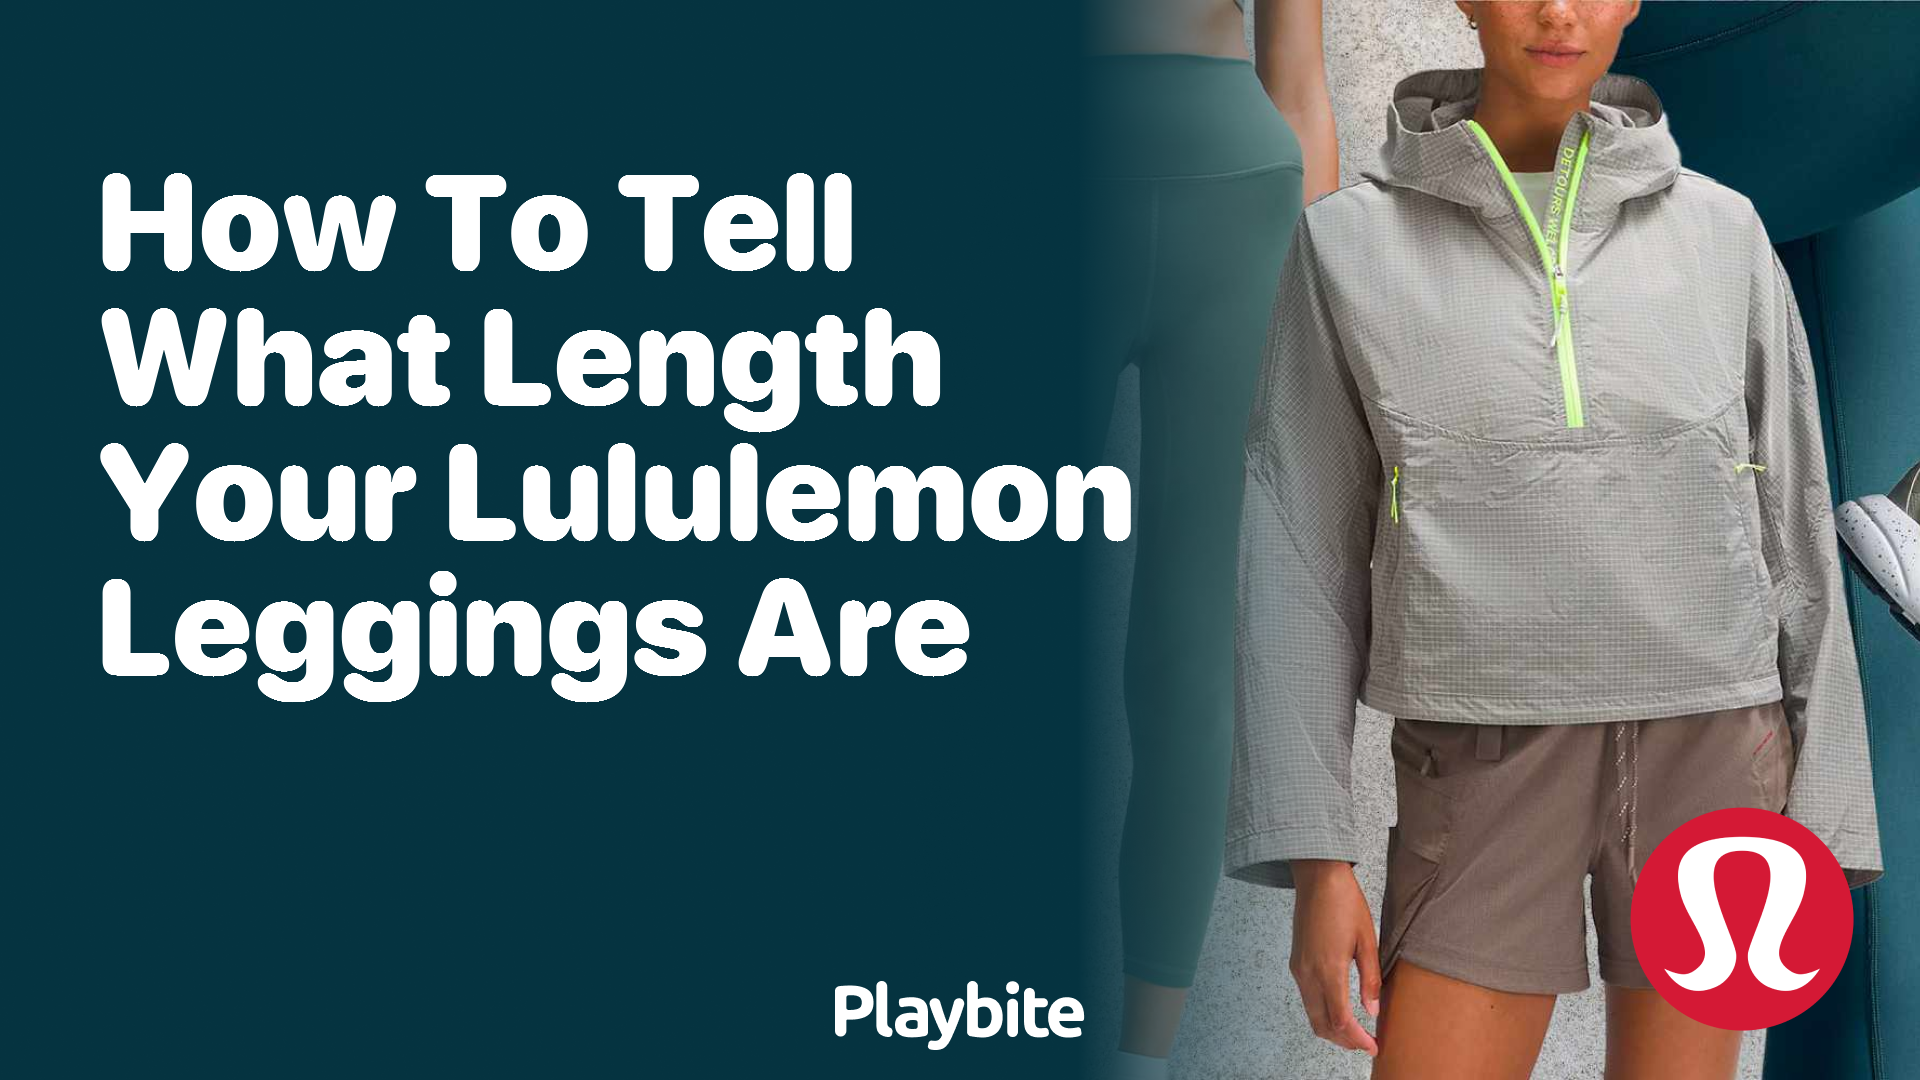 How to Tell What Length Your Lululemon Leggings Are - Playbite